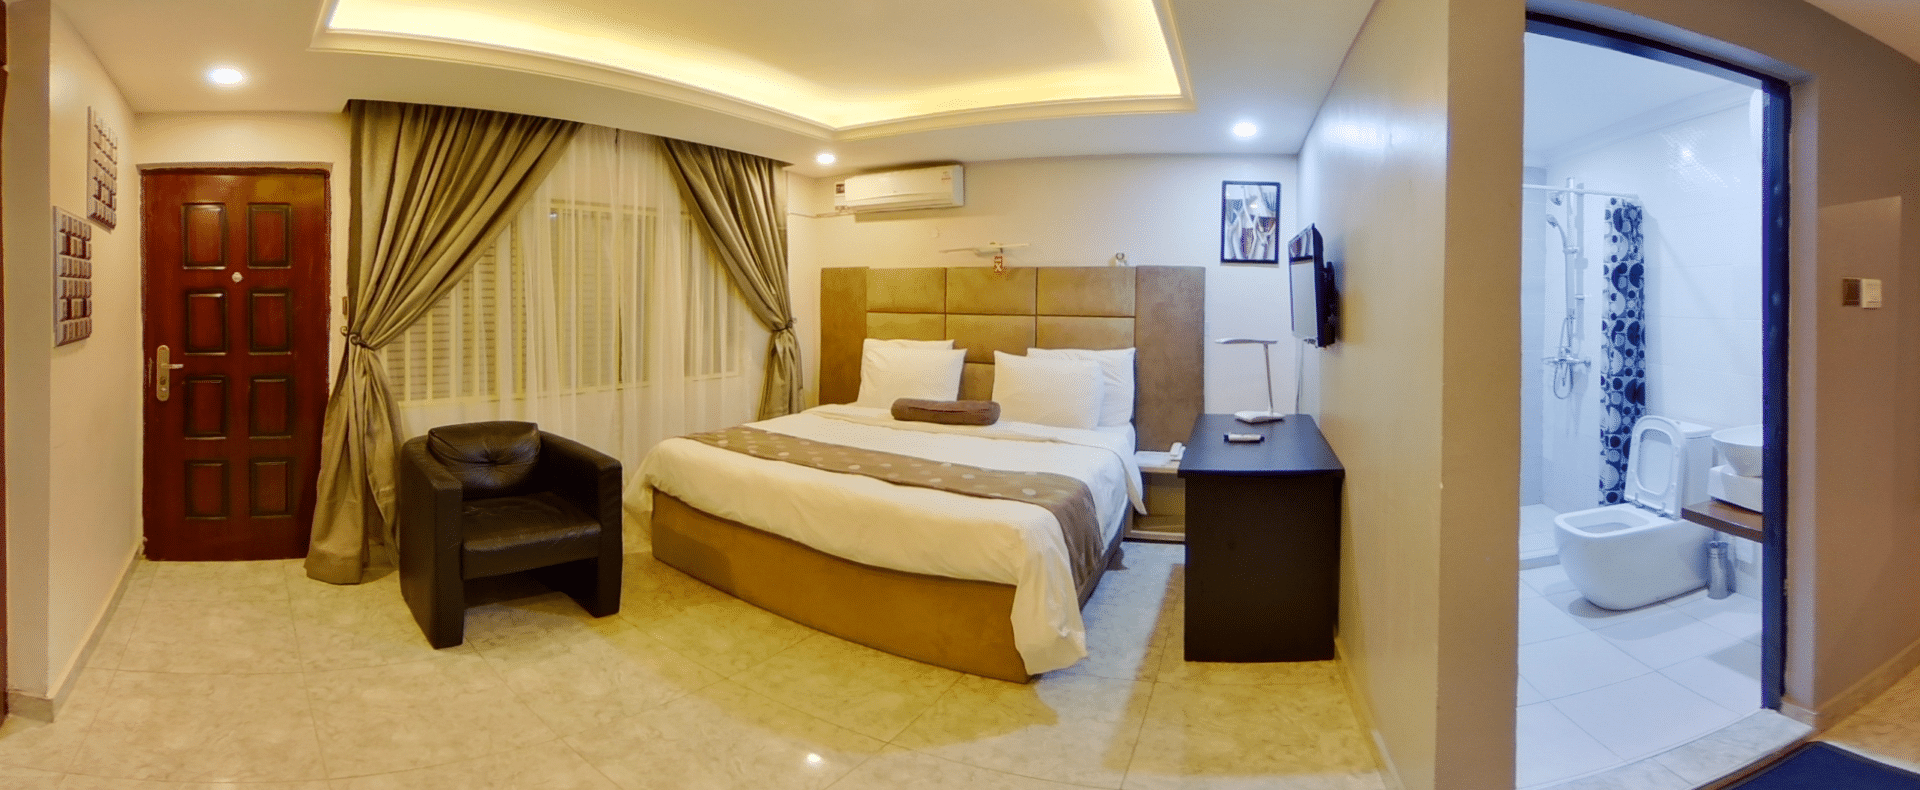 Hotel Super Deluxe For Booking In Abuja Fct Nigeria